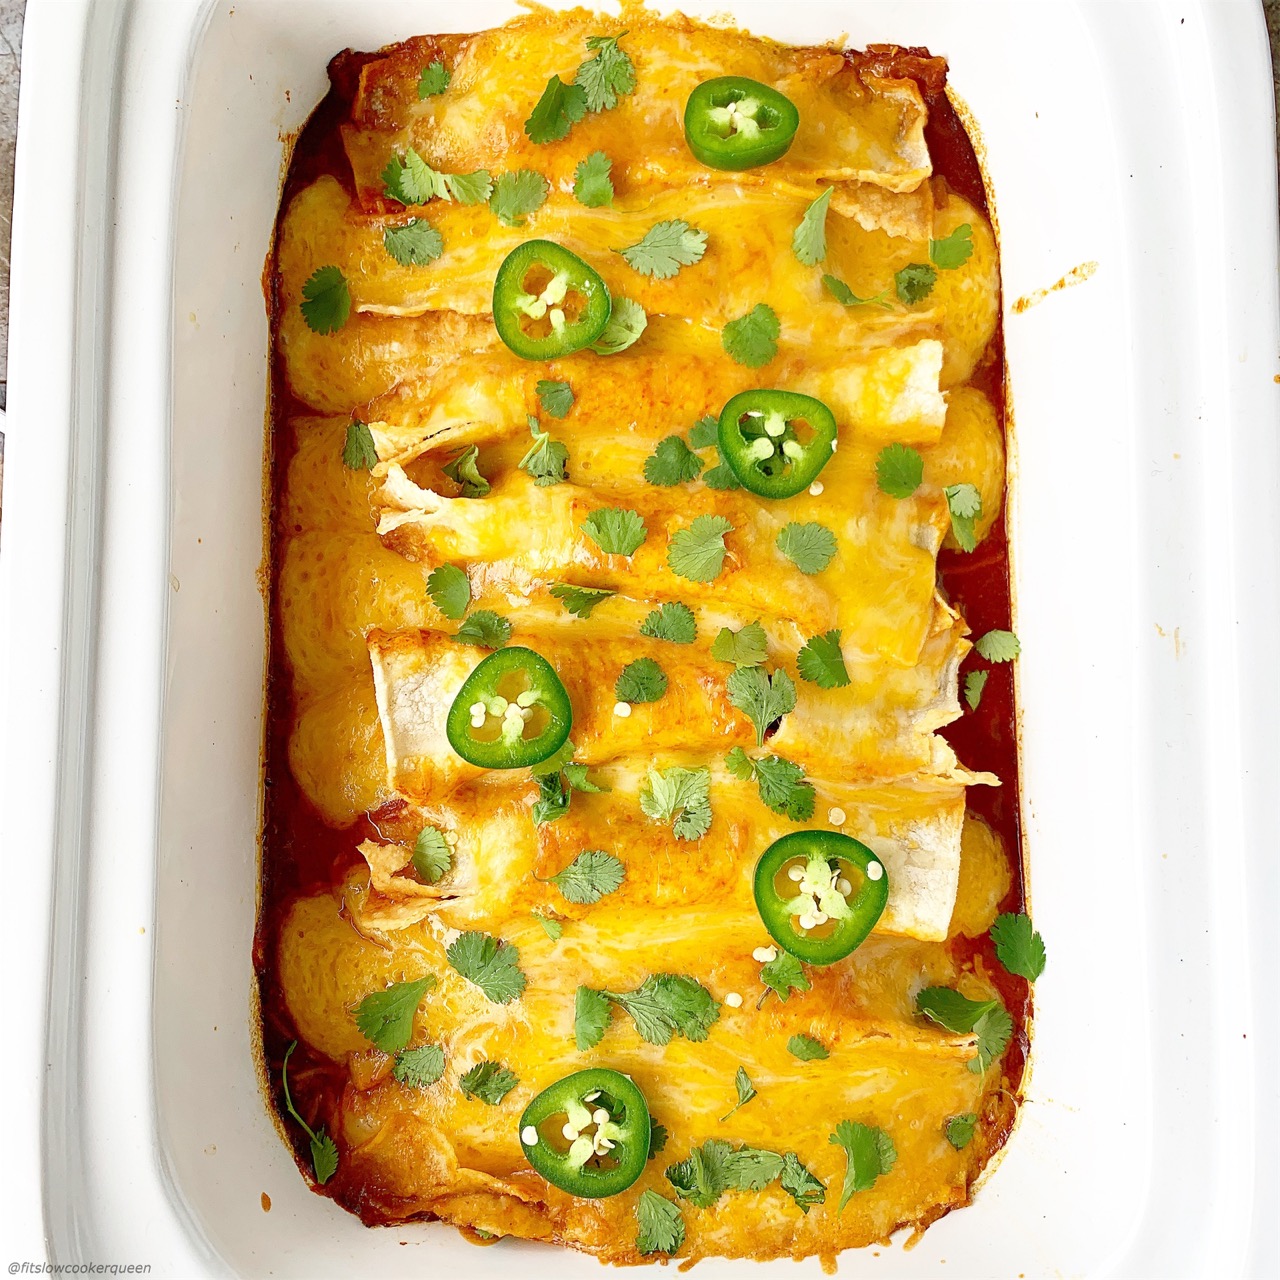 Easy slow cooker enchiladas! Free up your oven by letting your slow cooker do the work with this family-friendly Mexican recipe.